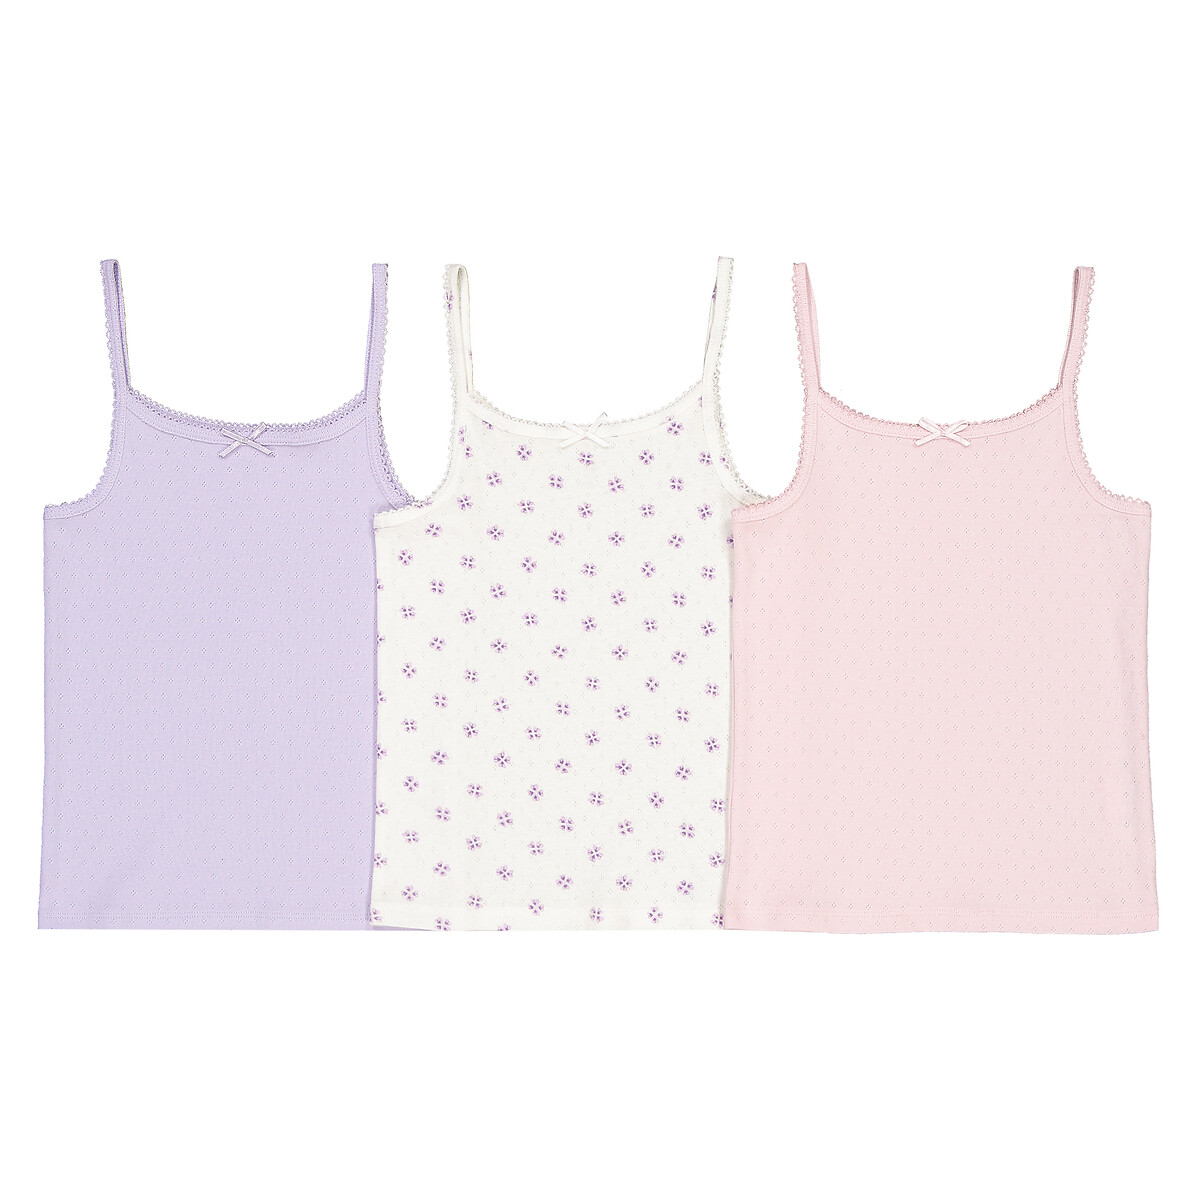 La Redoute Uniross Pack of 3 Cotton Ruffled Vest Tops 1 Month-4 Years 